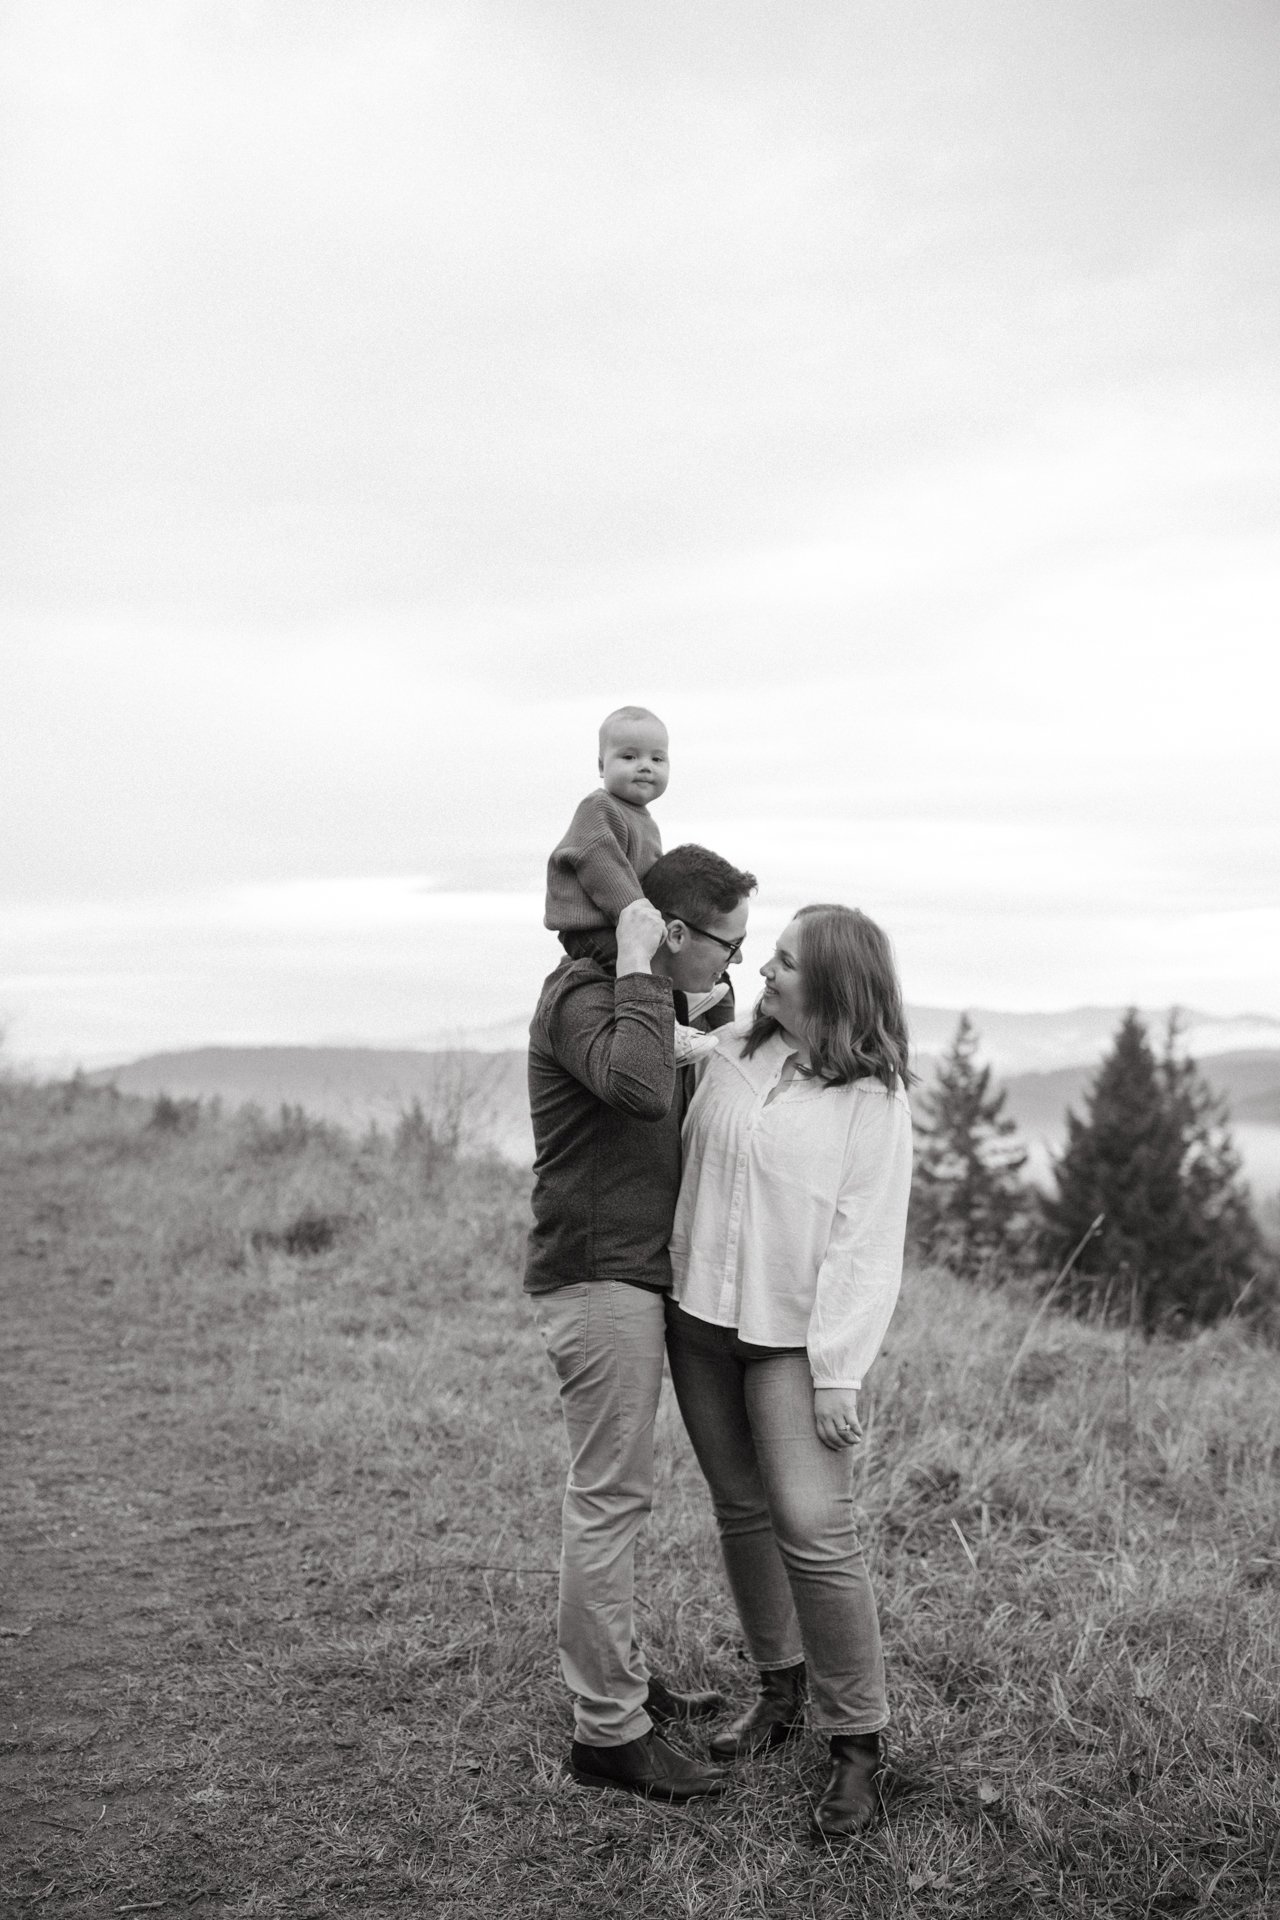 Image of Black Friday deals: $100 off lifestyle family session.